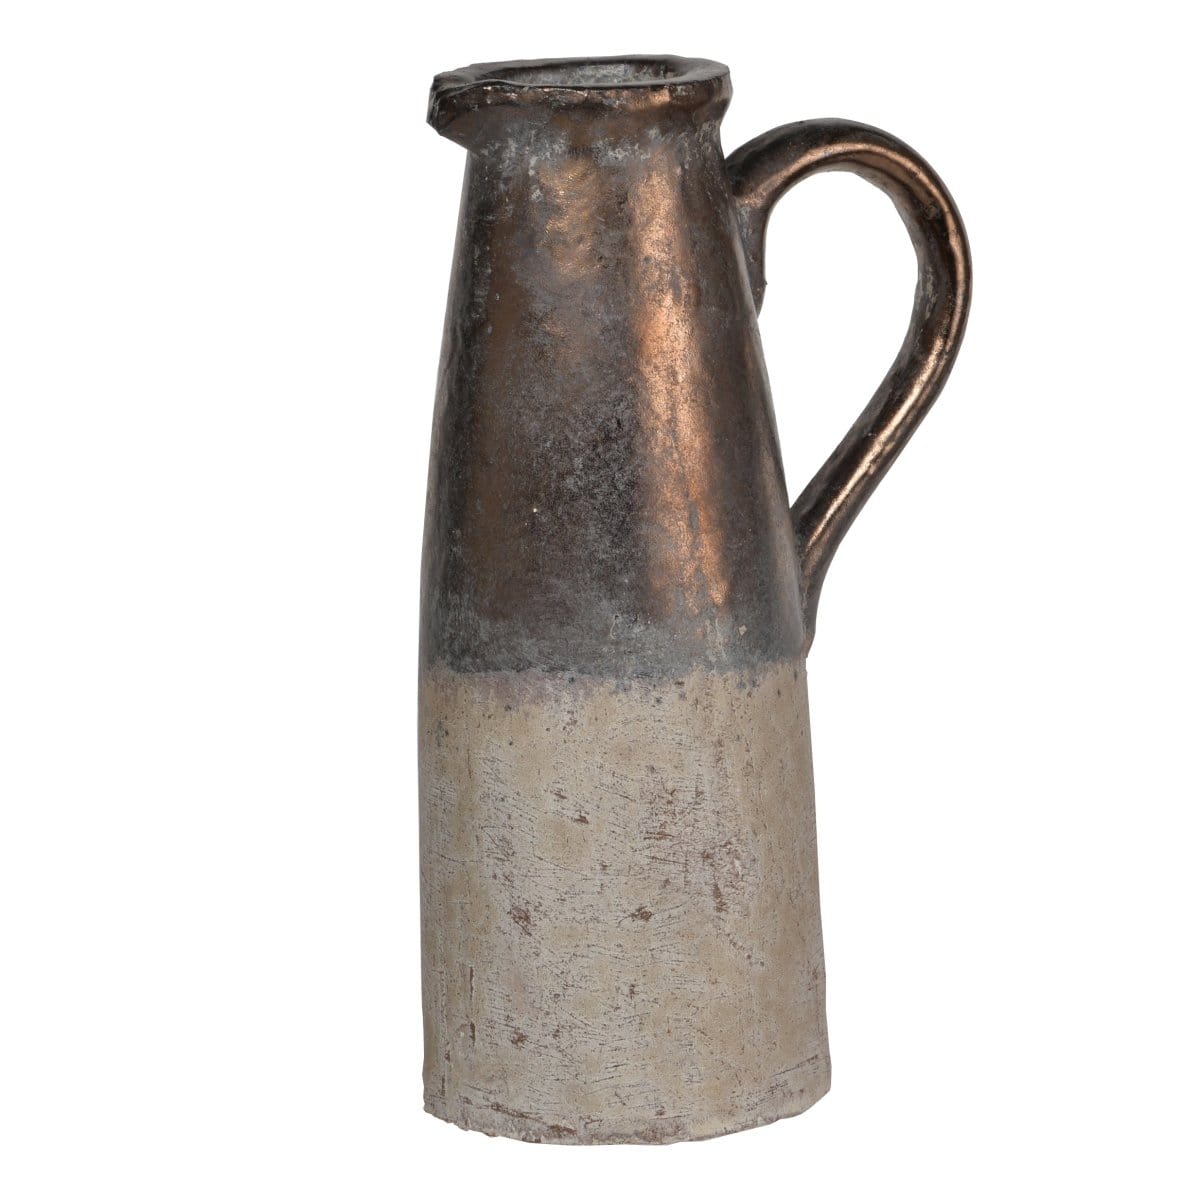 AB-1346 Candia Ceramic Pitcher, Sienna Brown picket and rail